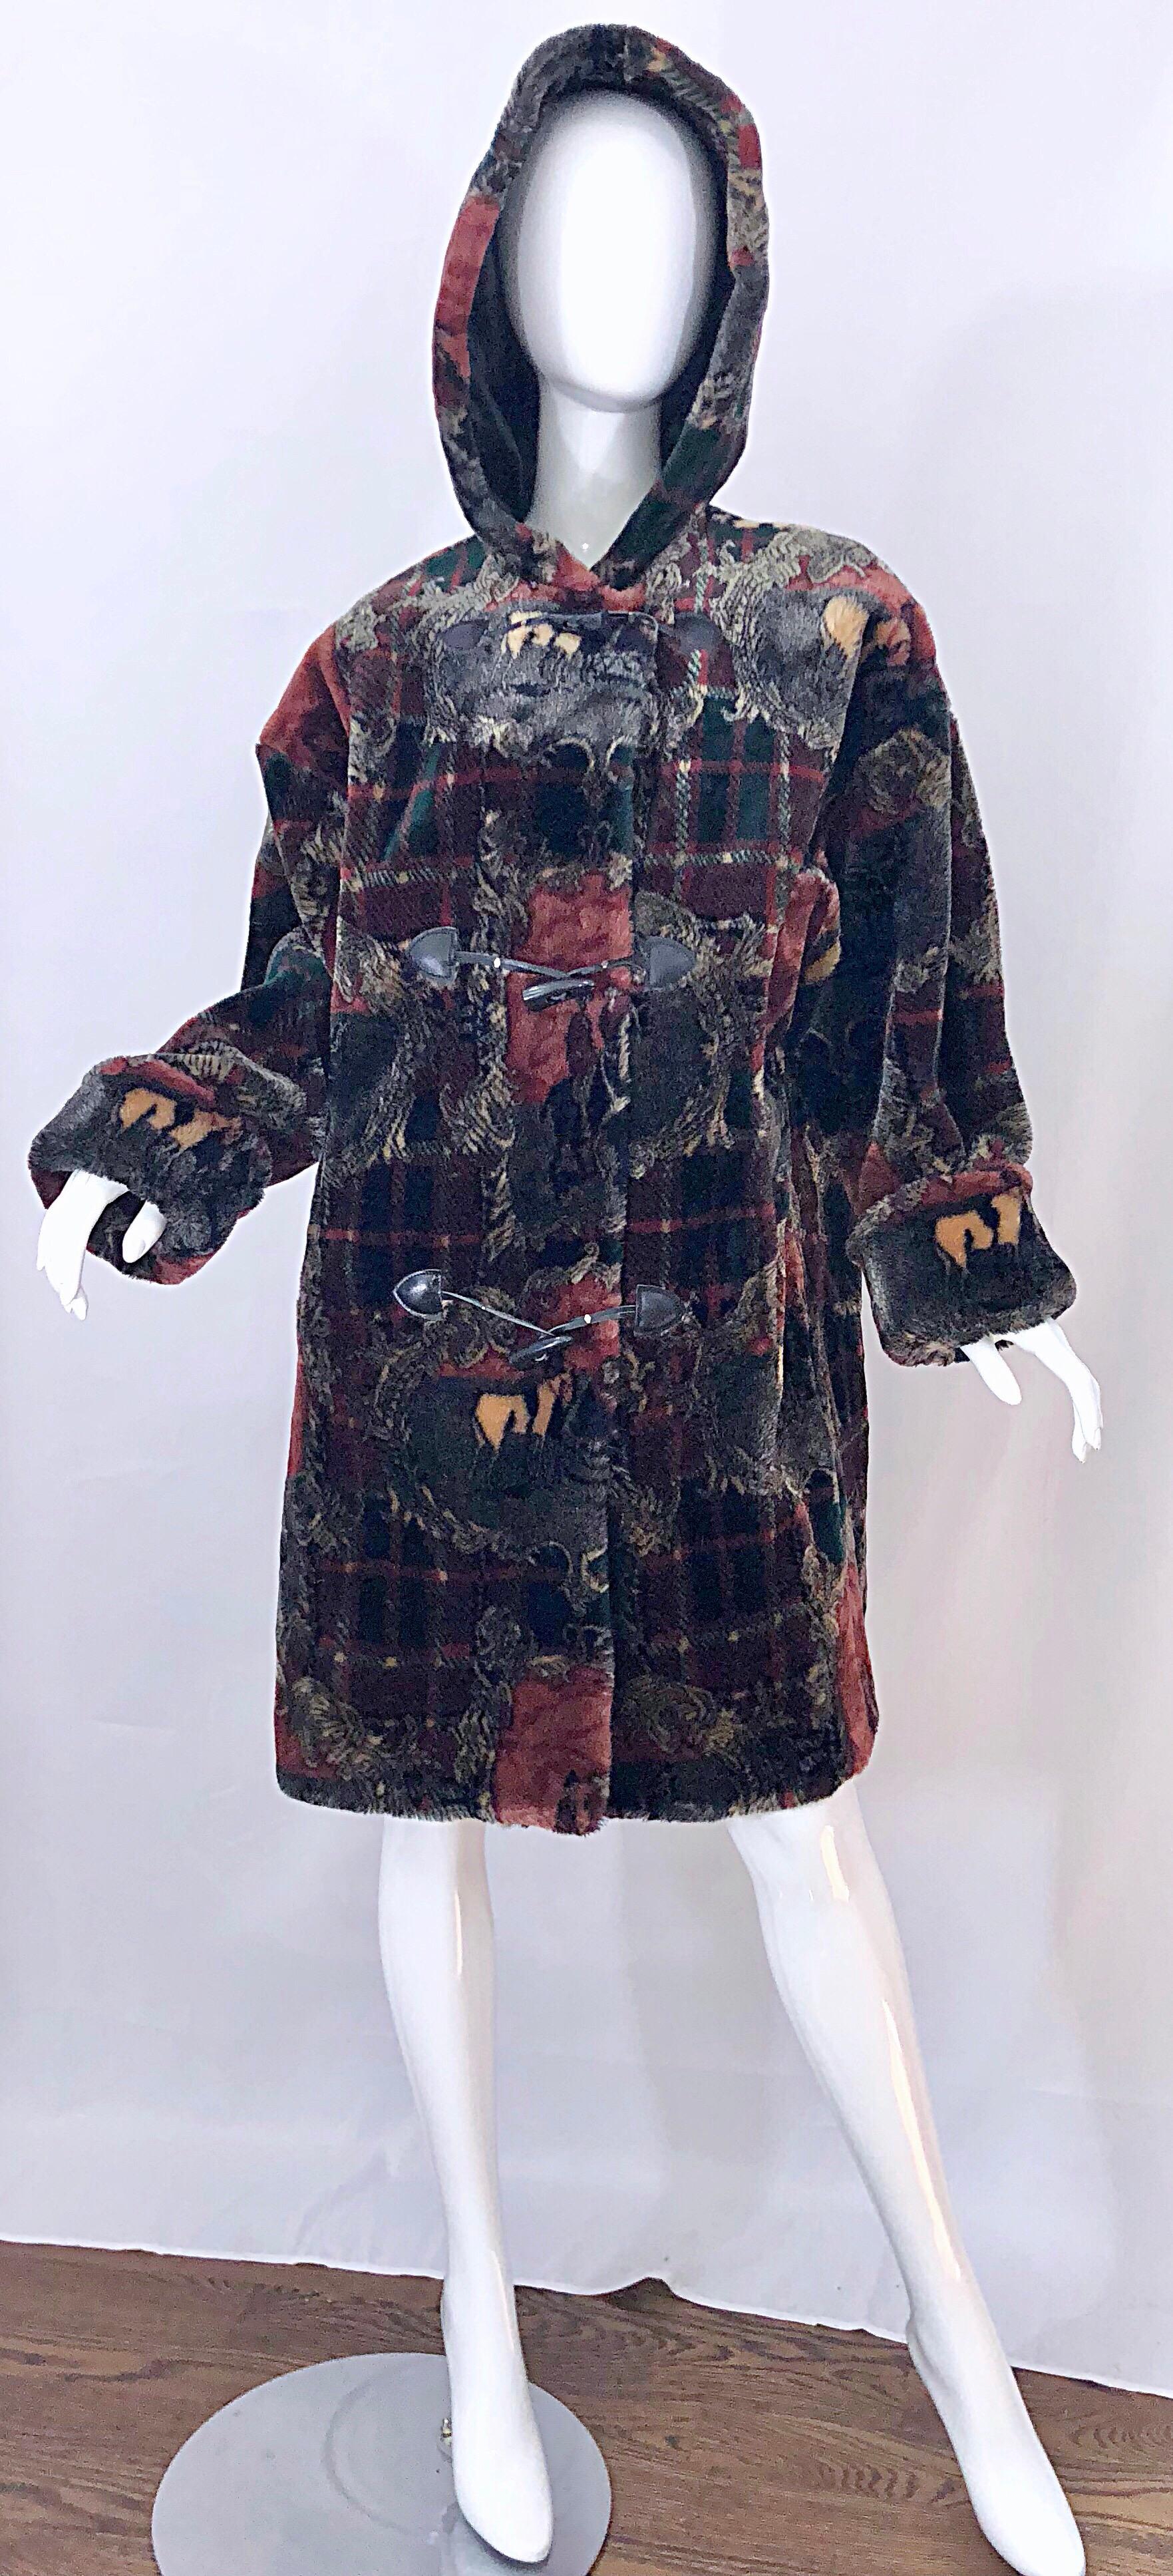 Extra Plush Vintage Faux Fur Equestrian Plaid Print Oversized Hooded Jacket For Sale 12